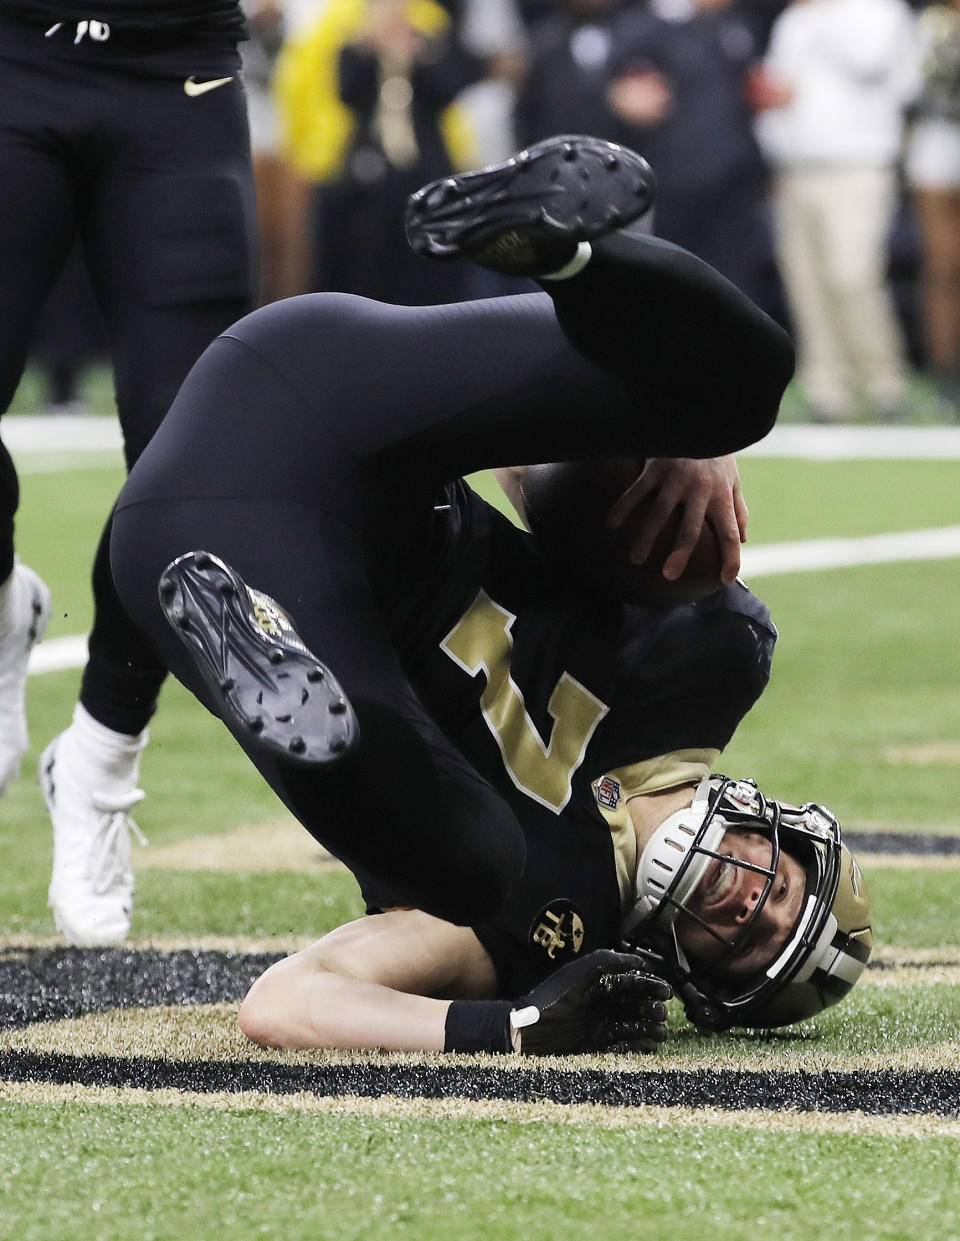 New Orleans Saints' Taysom Hill catches a touchdown pass during the second half the NFL football NFC championship game against the Los Angeles Rams Sunday, Jan. 20, 2019, in New Orleans. (AP Photo/Carolyn Kaster)